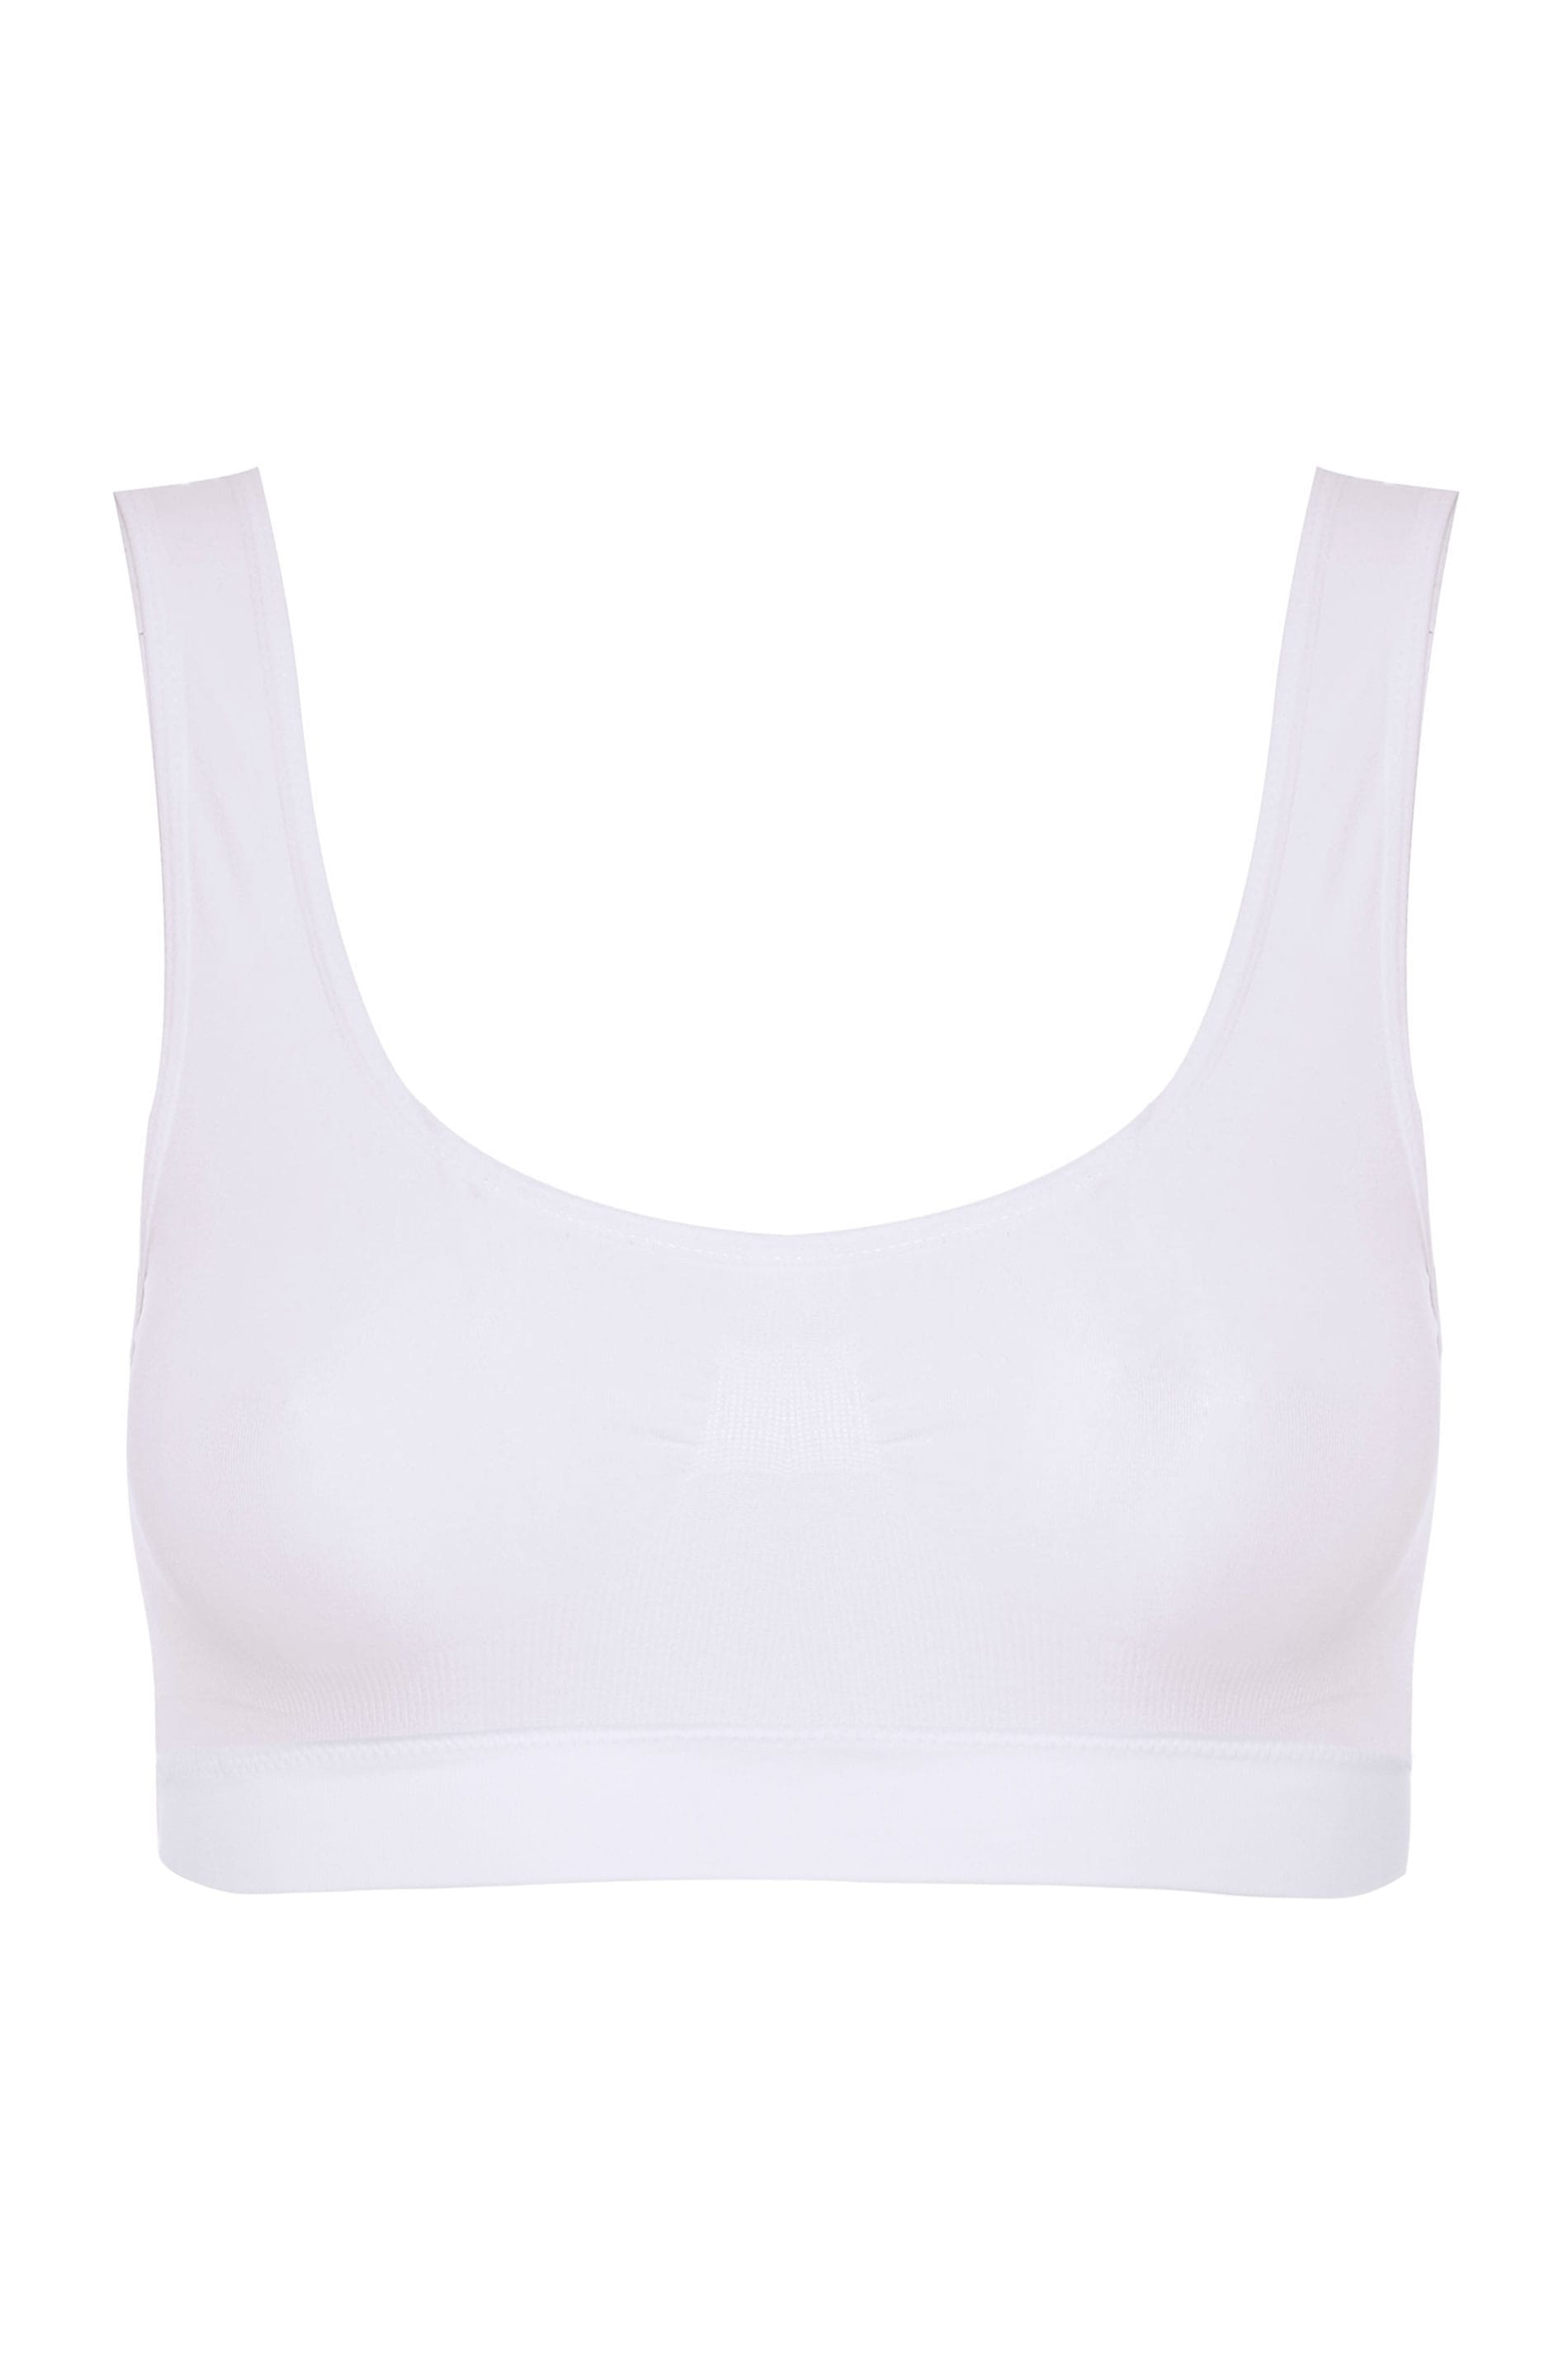 White Seamless Padded Non-Wired Bralette